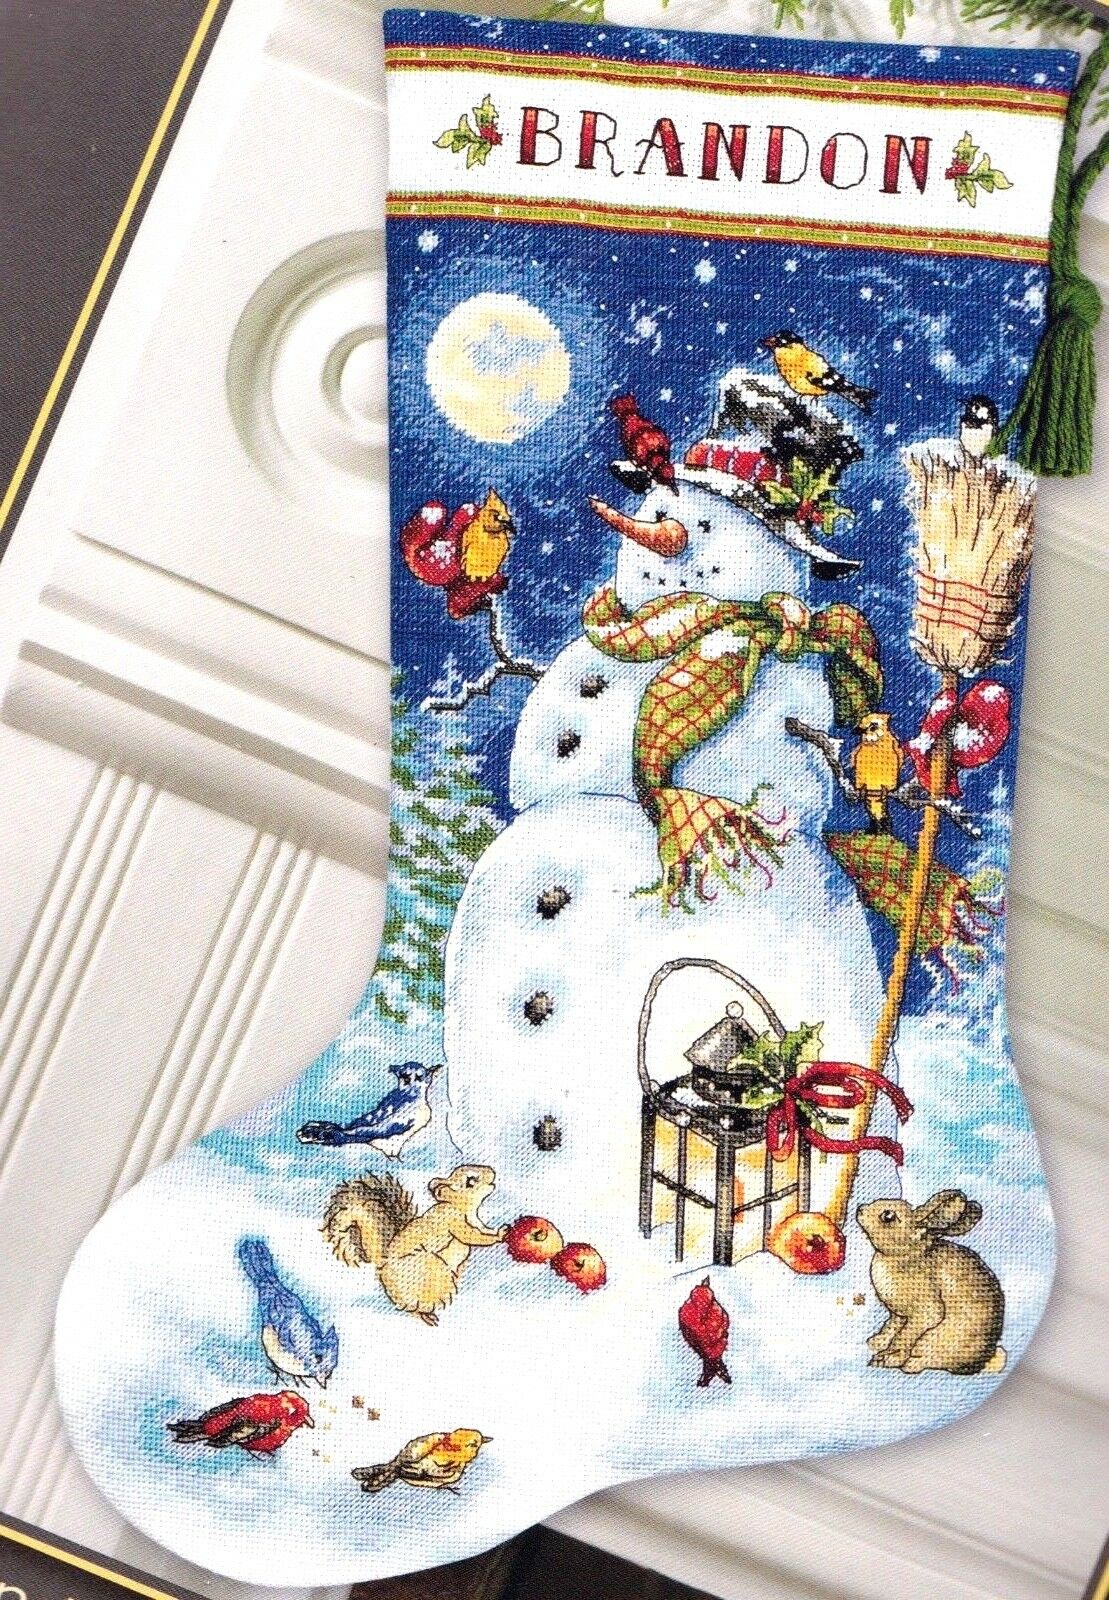 Design Works Counted Cross Stitch Stocking Kit 17 Long-Snowman W